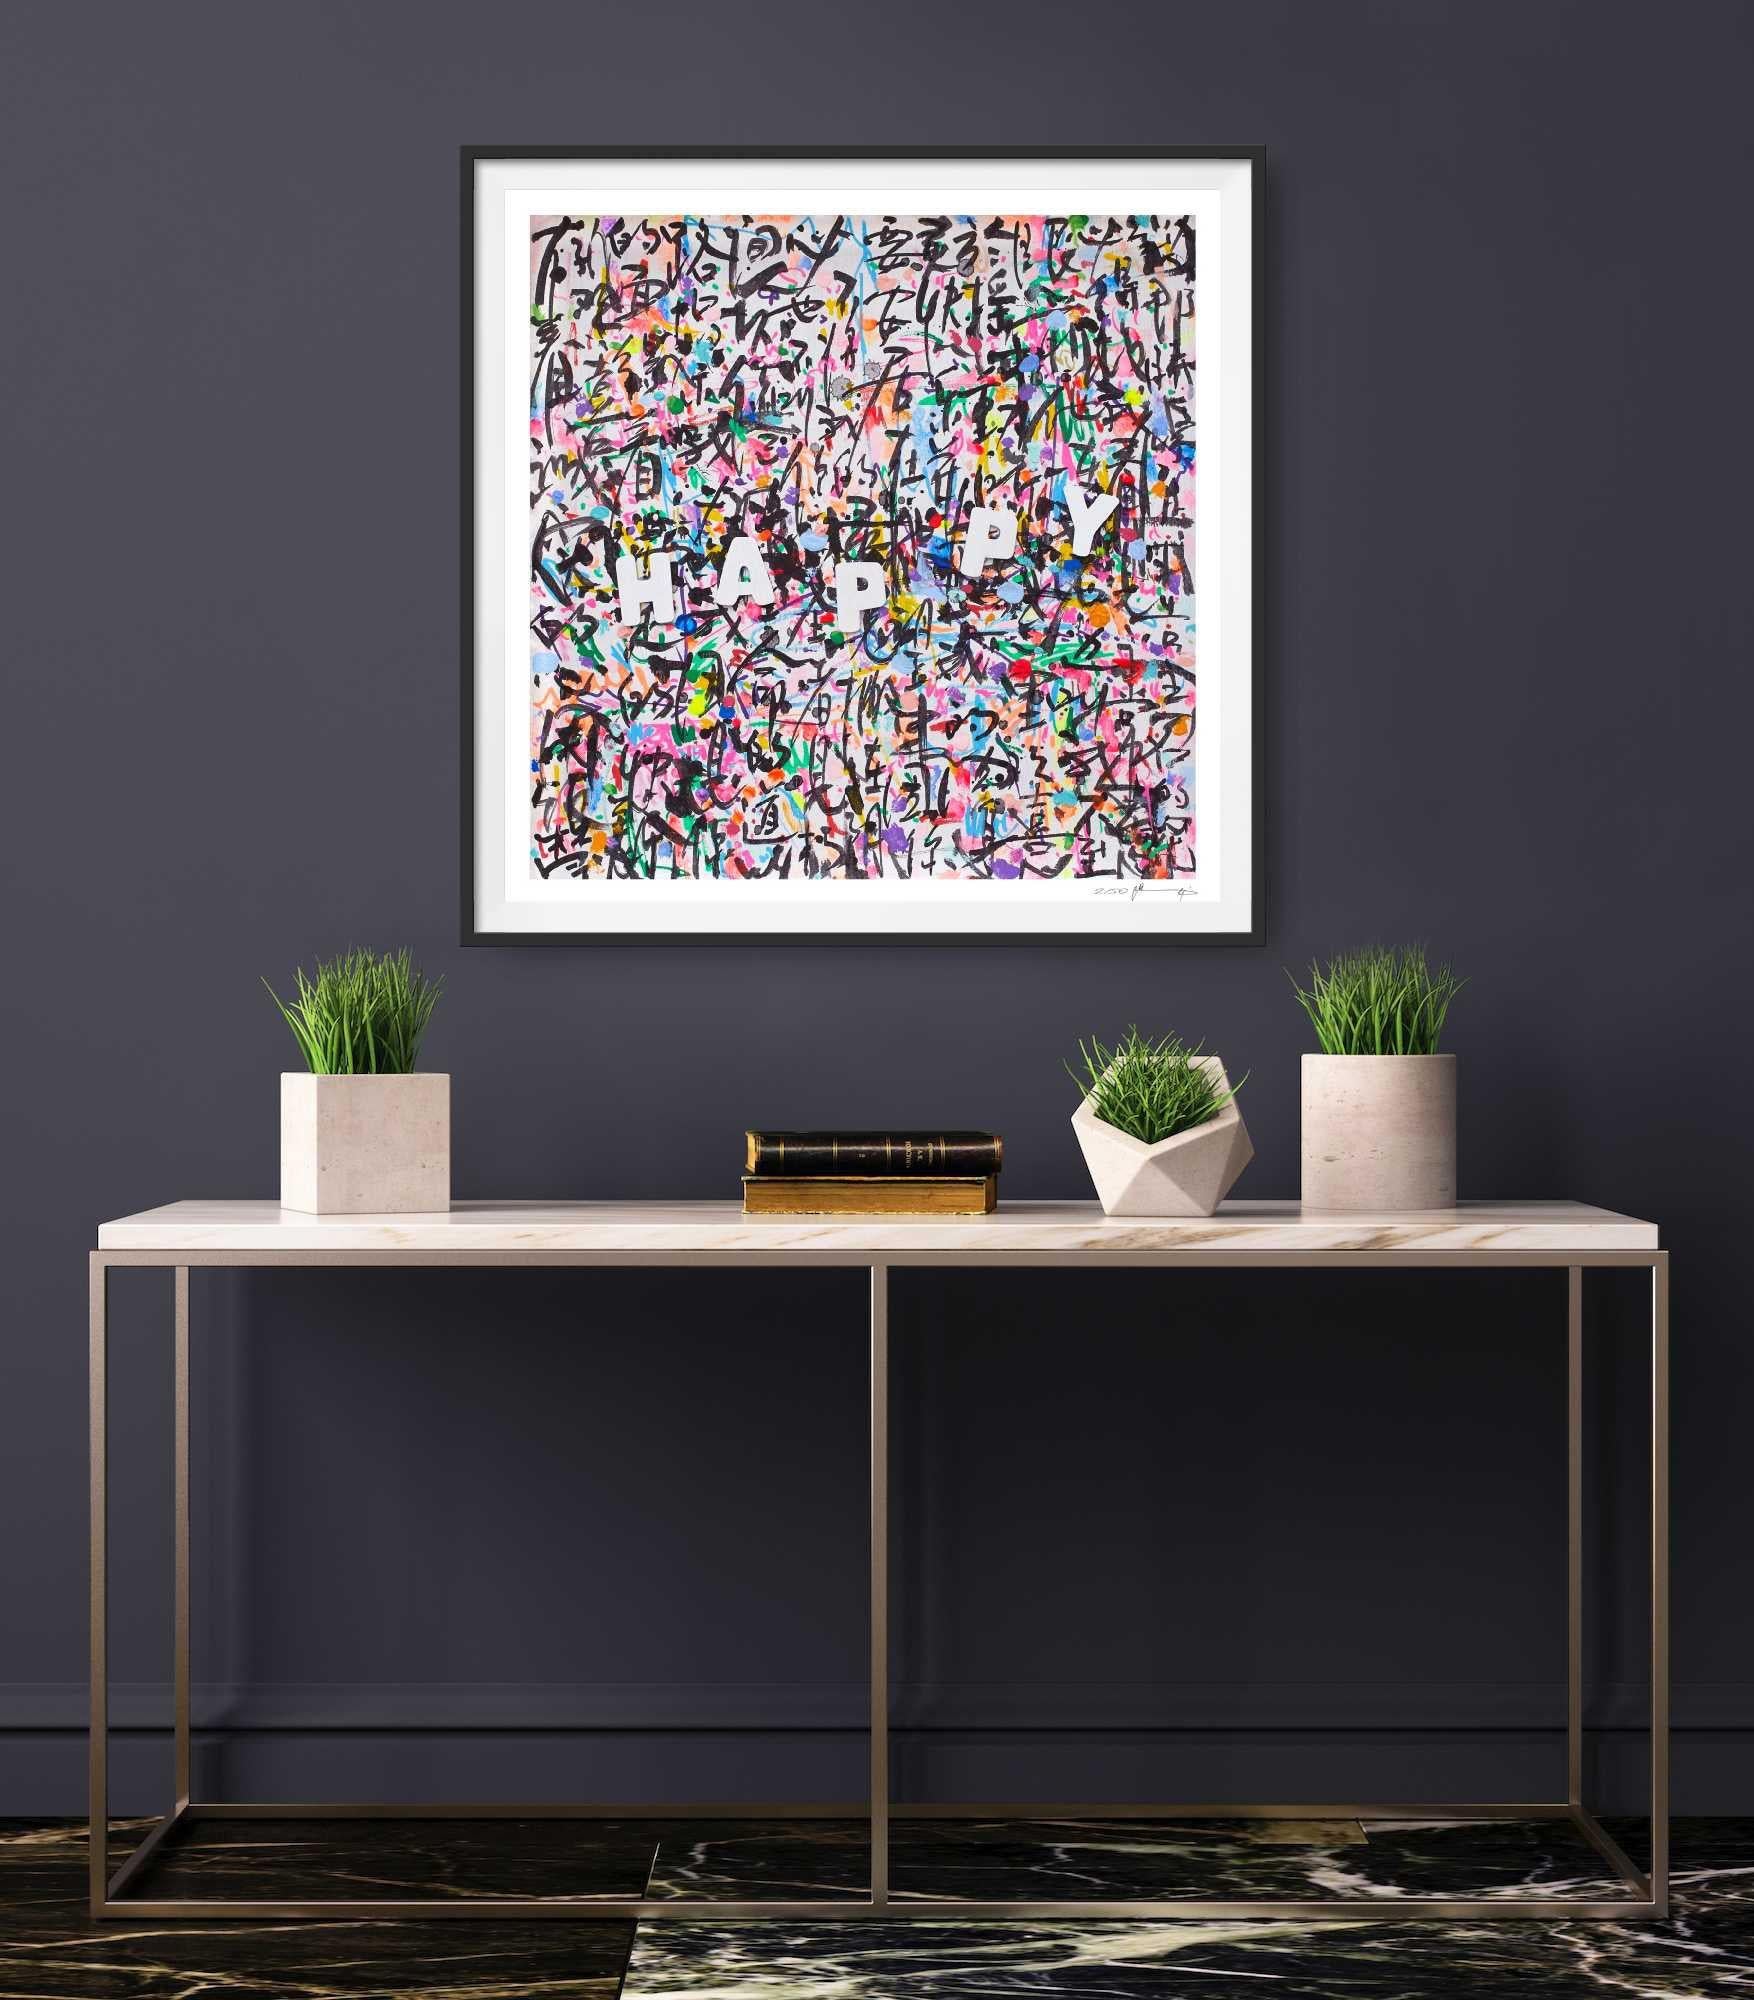 Such a happy artwork! The artwork looks even more vibrant in person, as I used metallic and neon colors. Inspired by prayer, Chinese calligraphy and graffiti art, this artwork is rich in texture and details.  It is a small but luminous work to